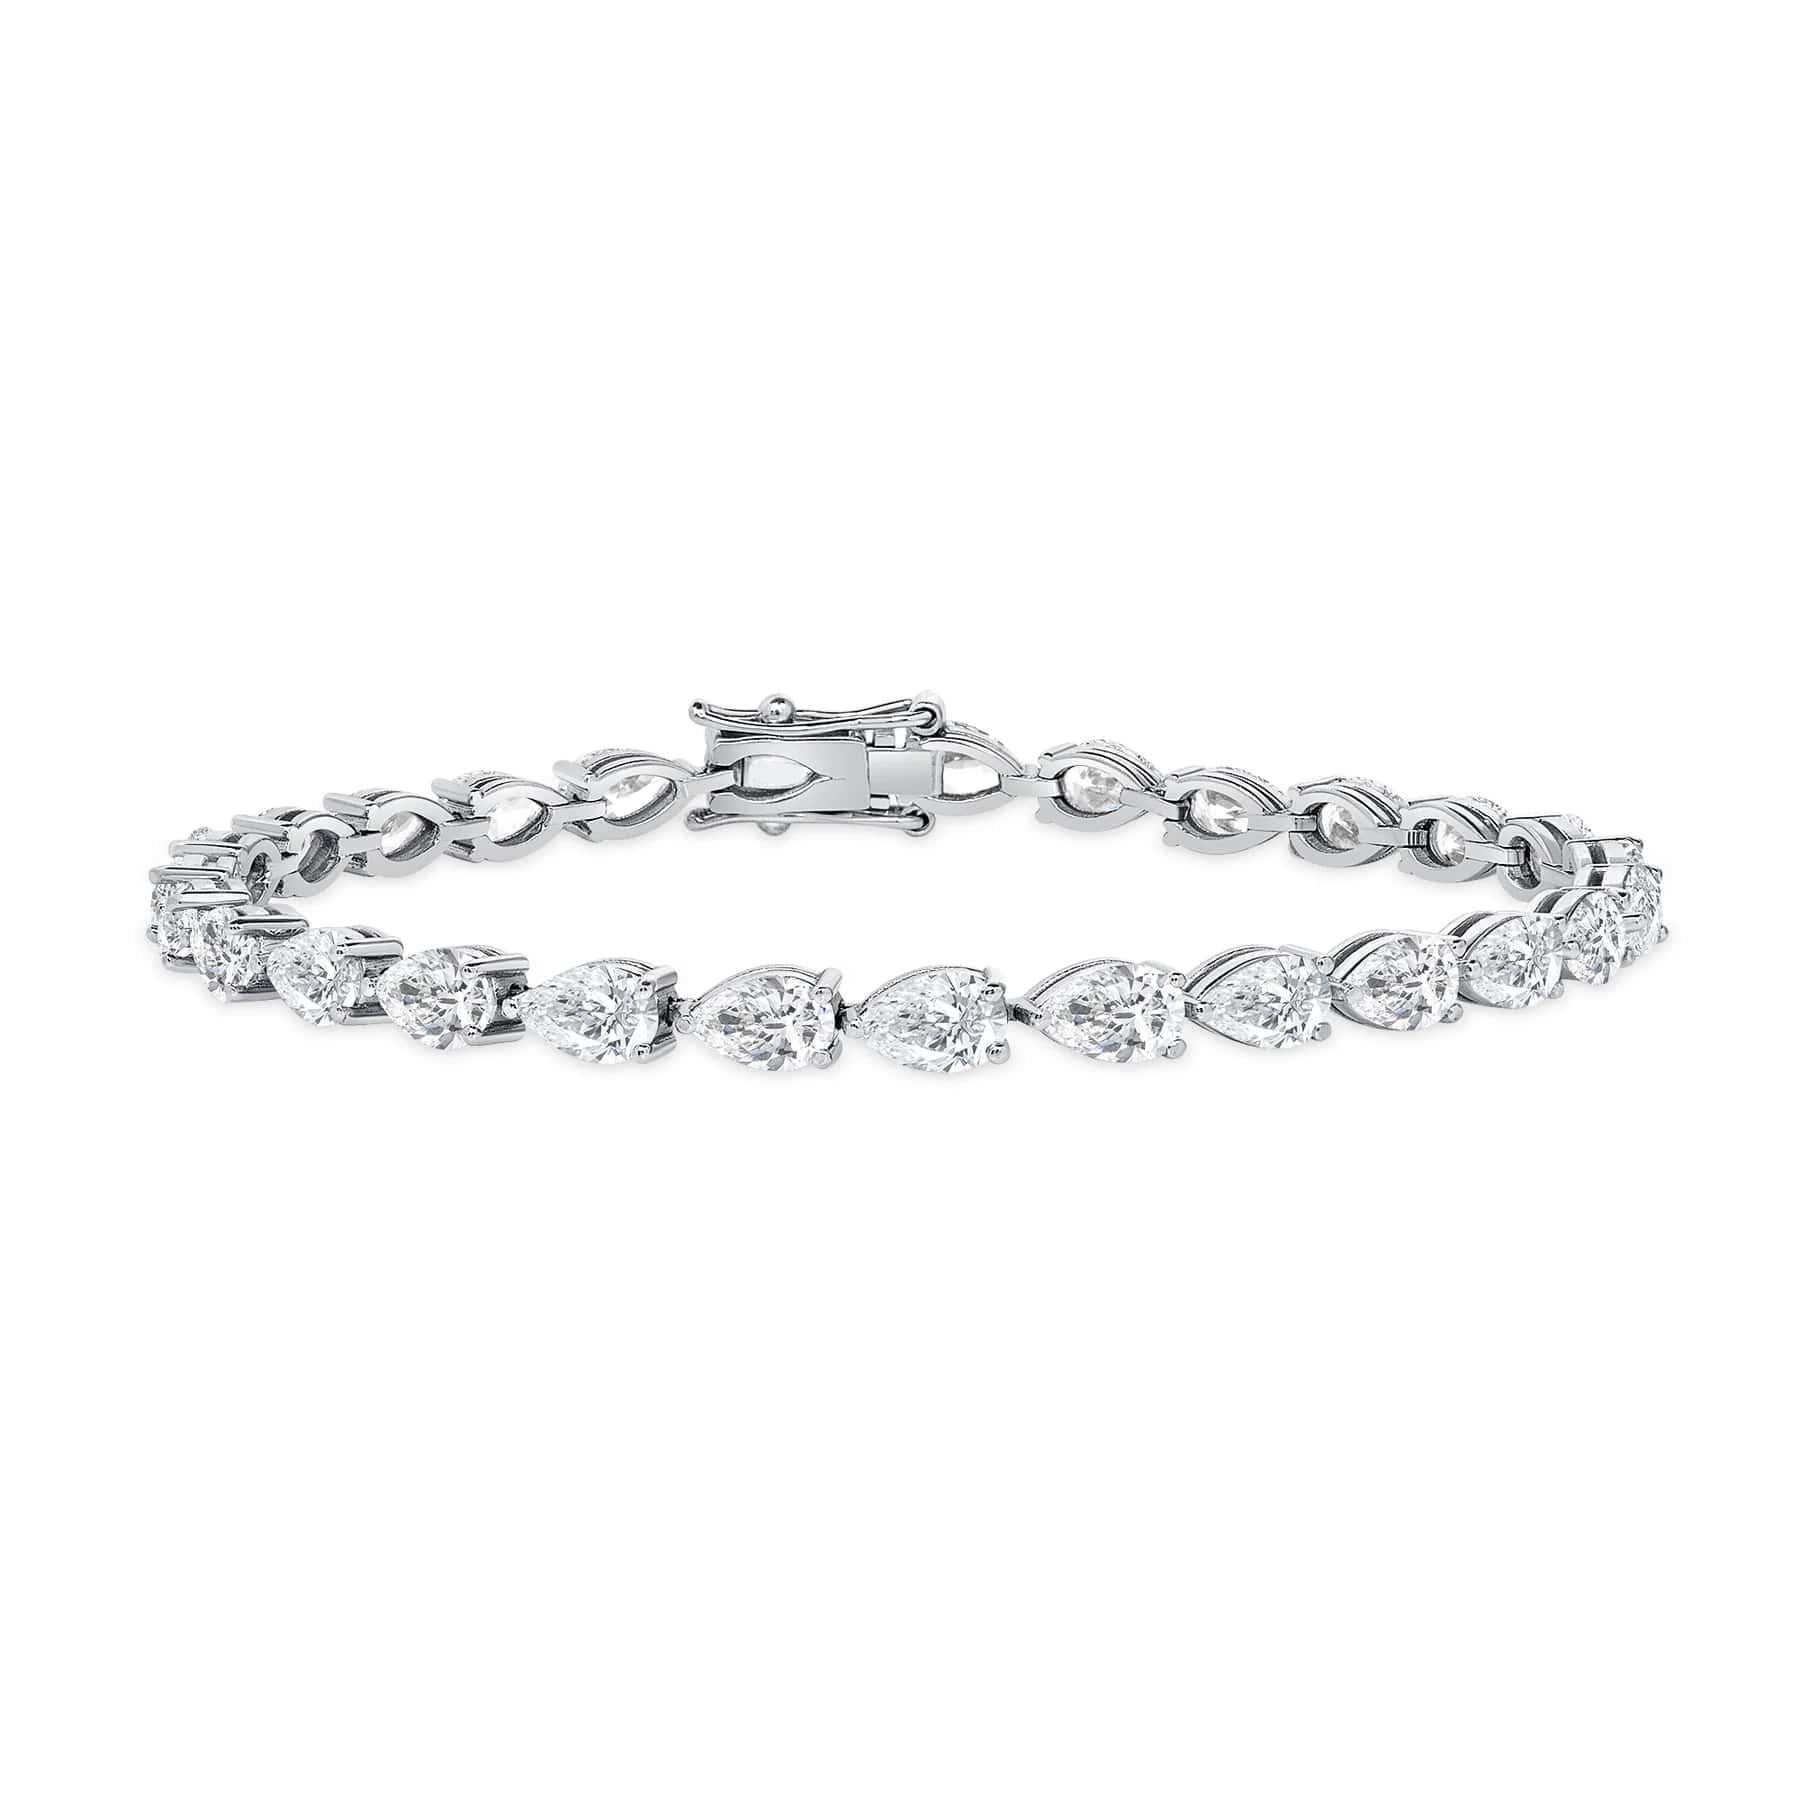 Amiyah's Tennis Bracelet - 3-prong In New Condition For Sale In Los Angeles, CA